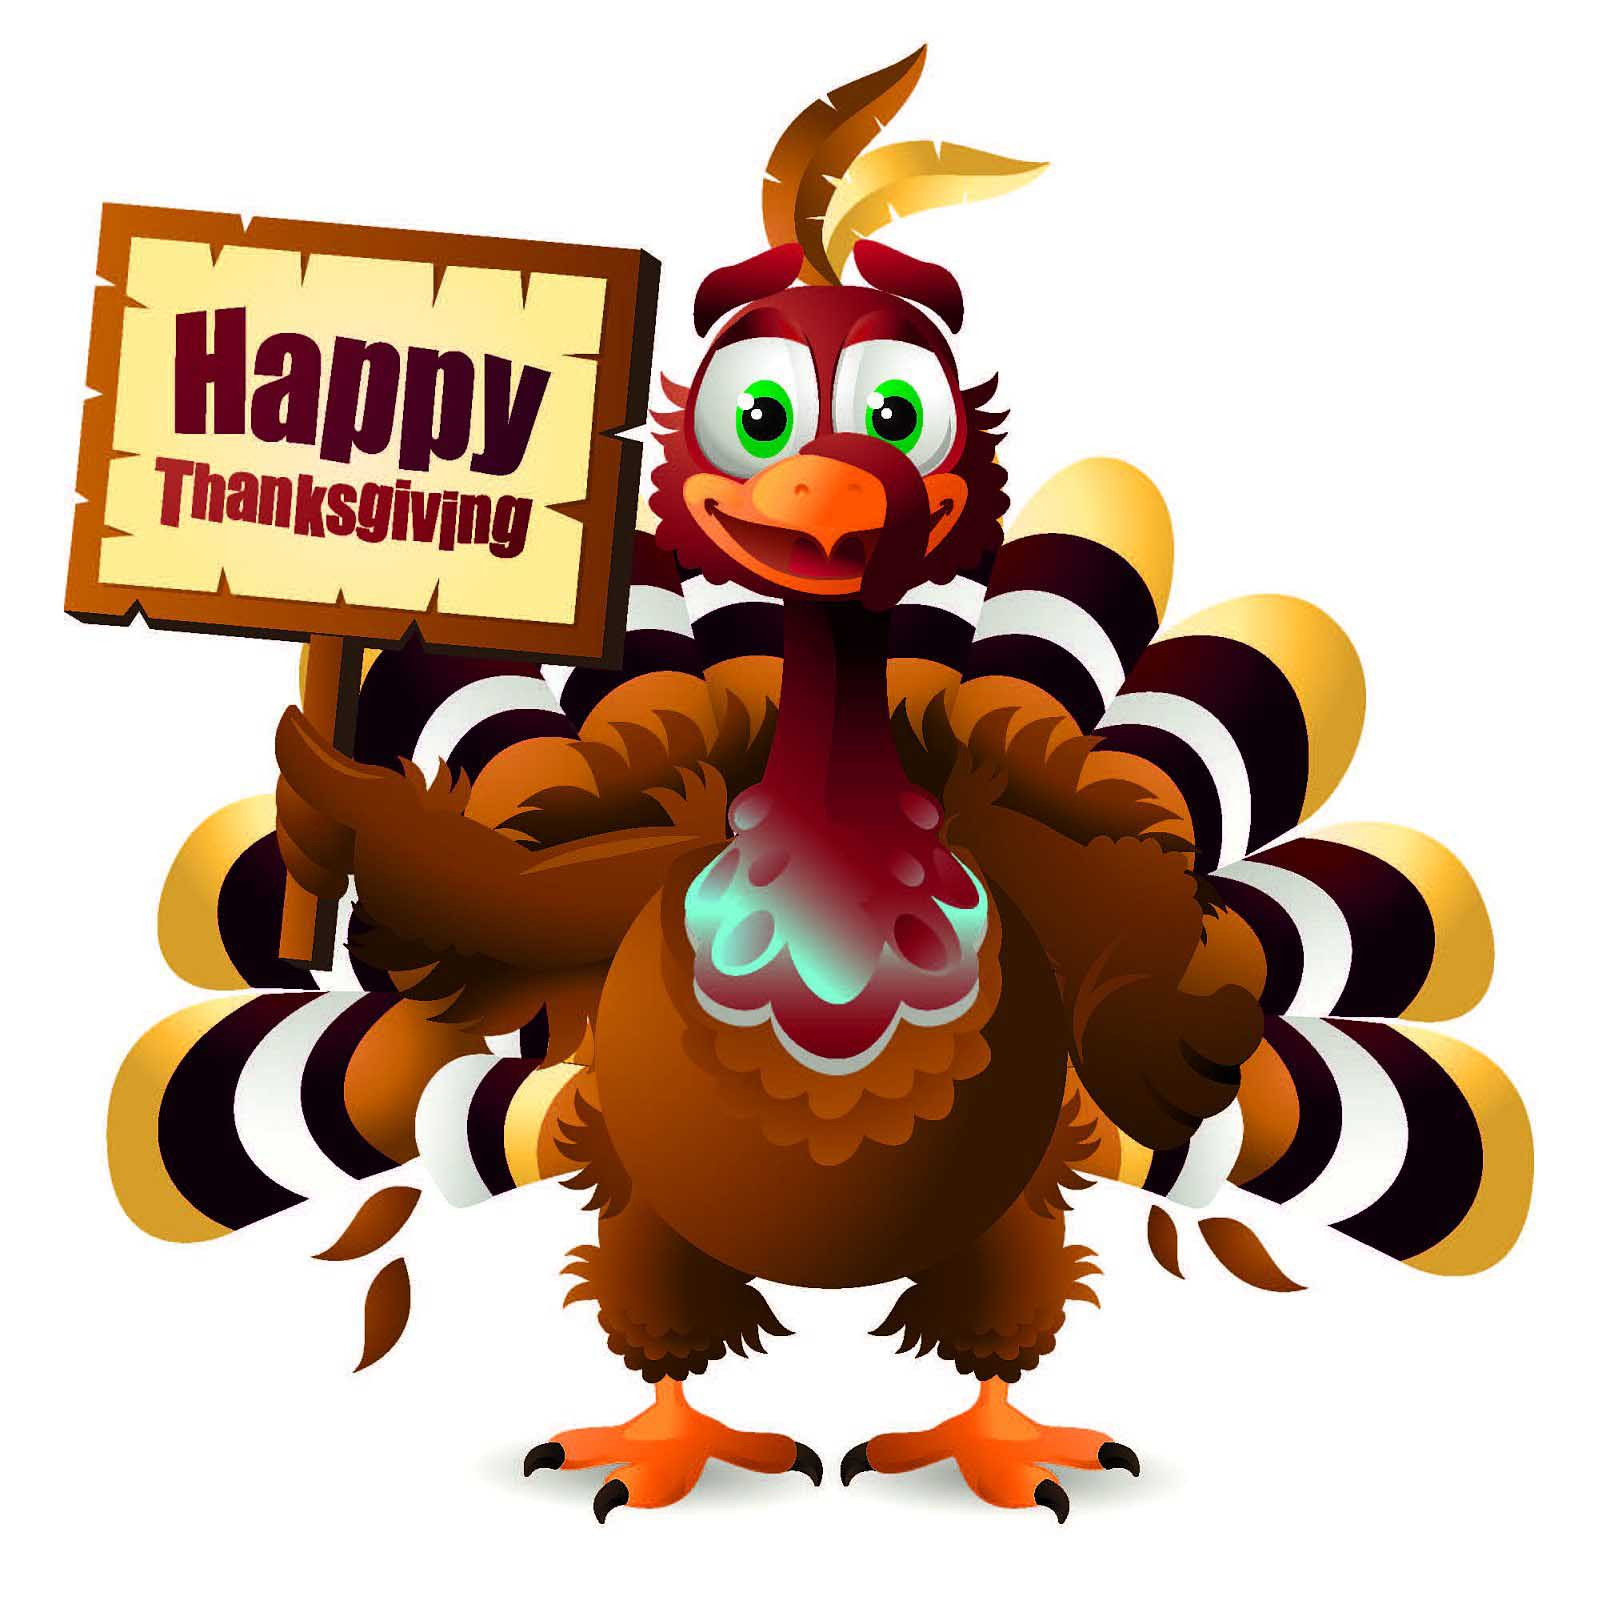 Thanksgiving Turkey Image
 2016 Thanksgiving Charlie Brown Wallpapers & Clipart s